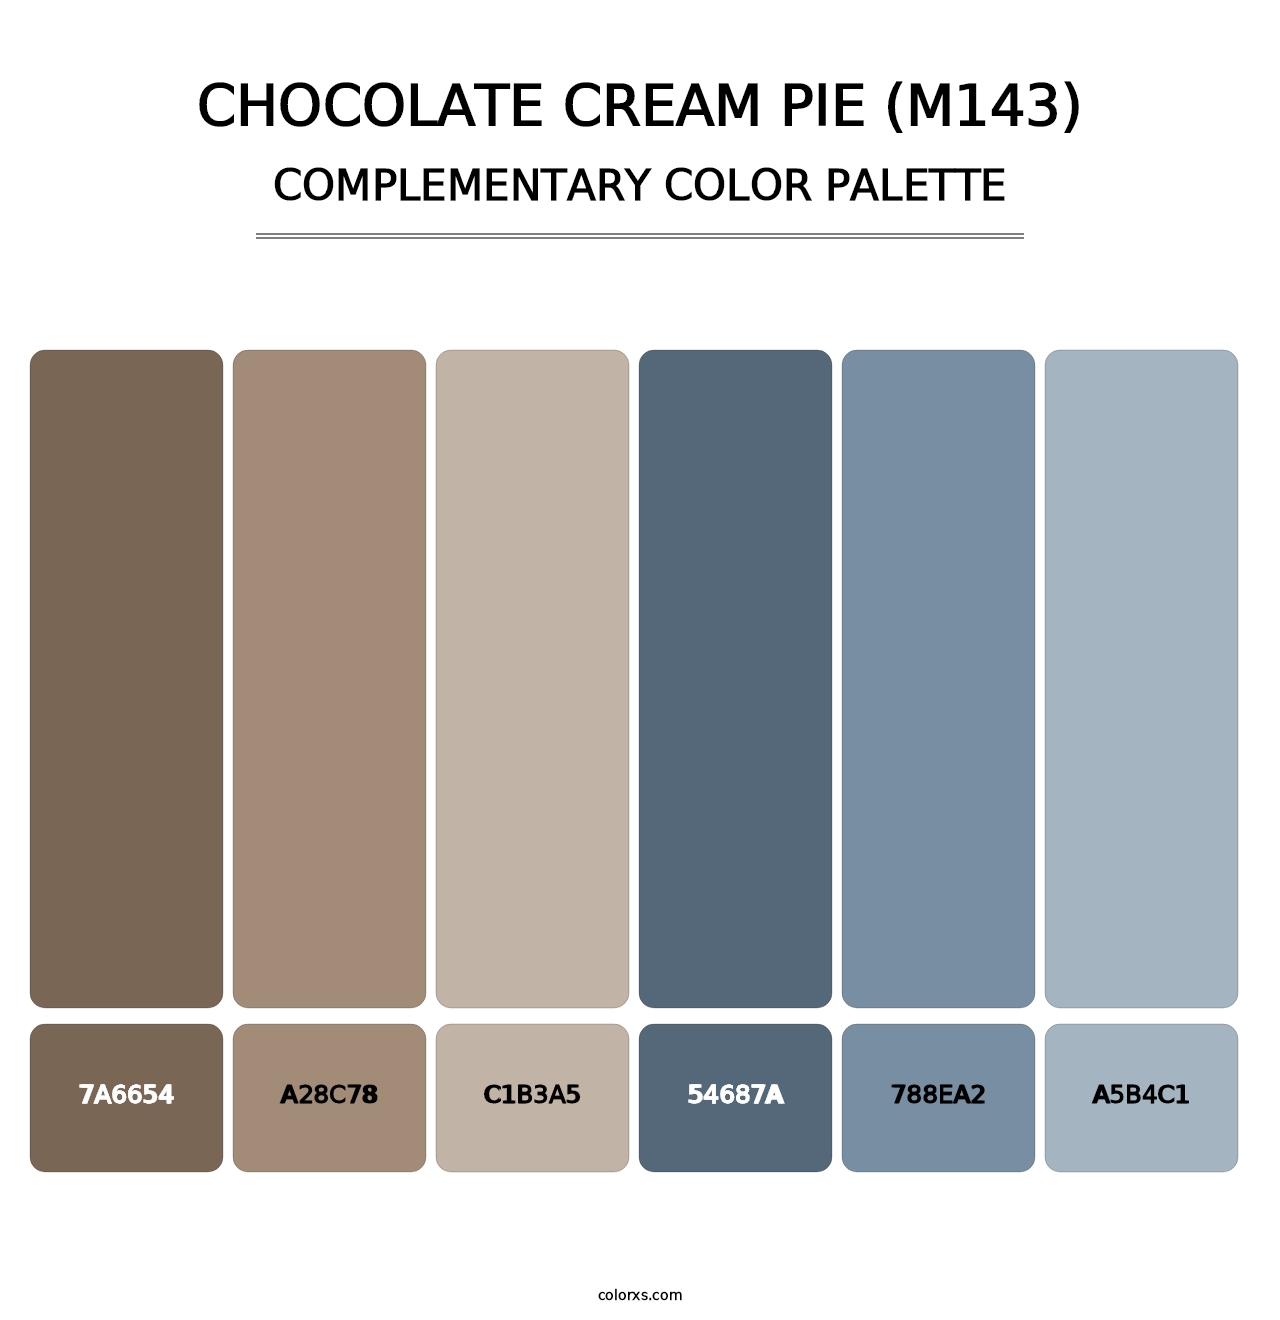 Chocolate Cream Pie (M143) - Complementary Color Palette